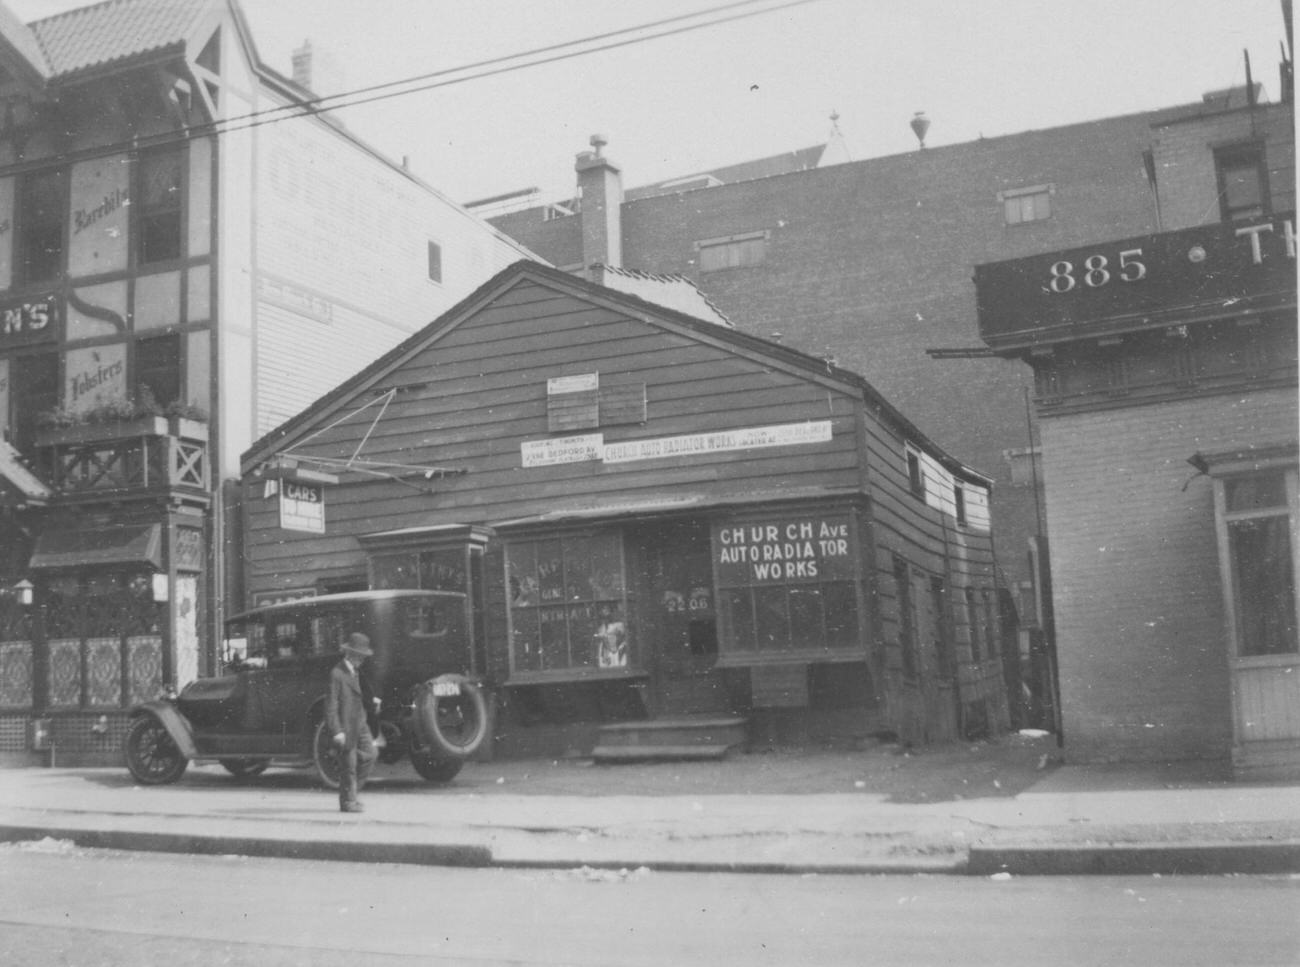 Old Store Painted Green, Shingled, South Side Of Church Avenue, East Of Flatbush Avenue, 1923